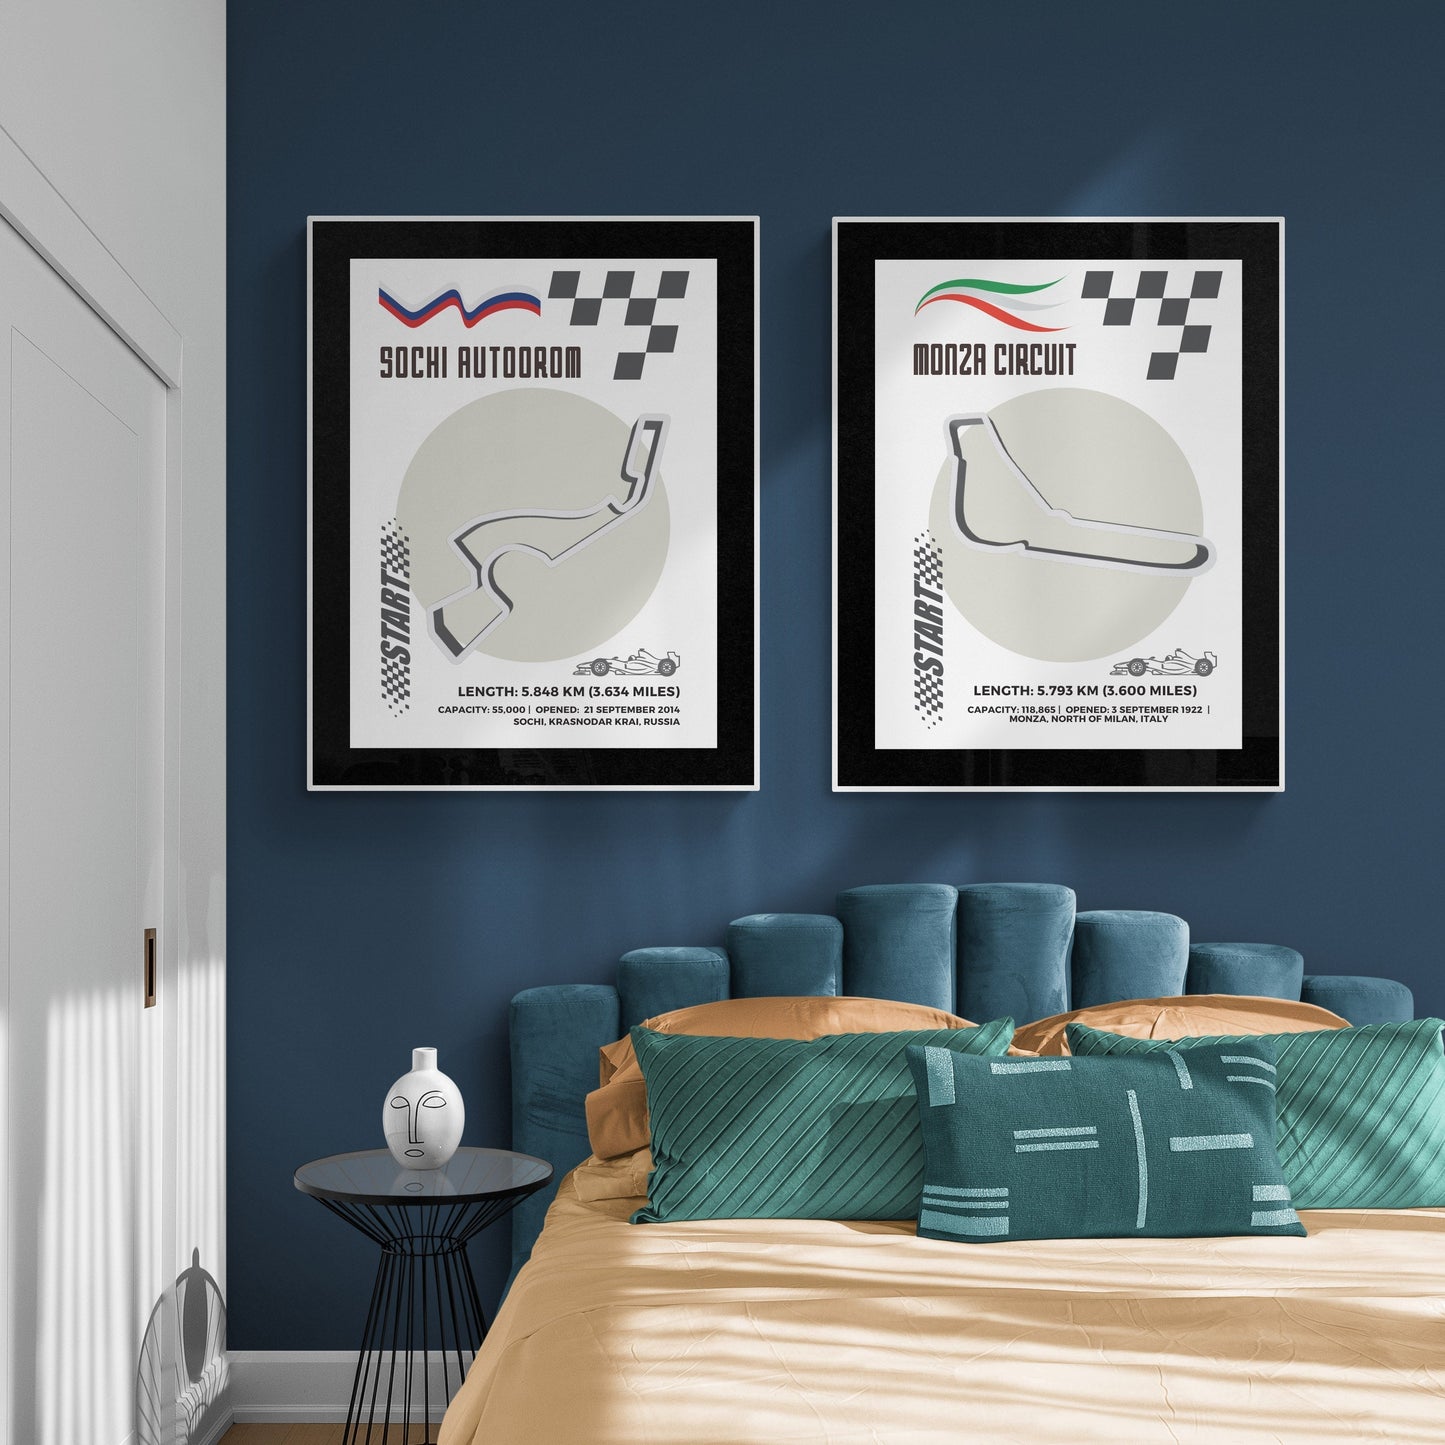 Become a racing expert with our Circuit de Monaco F1 Posters. Each featuring detailed information on the track's history, construction year, country, and notable moments. Made with age-resistant premium paper, these posters are a must-have for any Formula One fan. Combine with our "Formula One Poster" for the ultimate racing display.